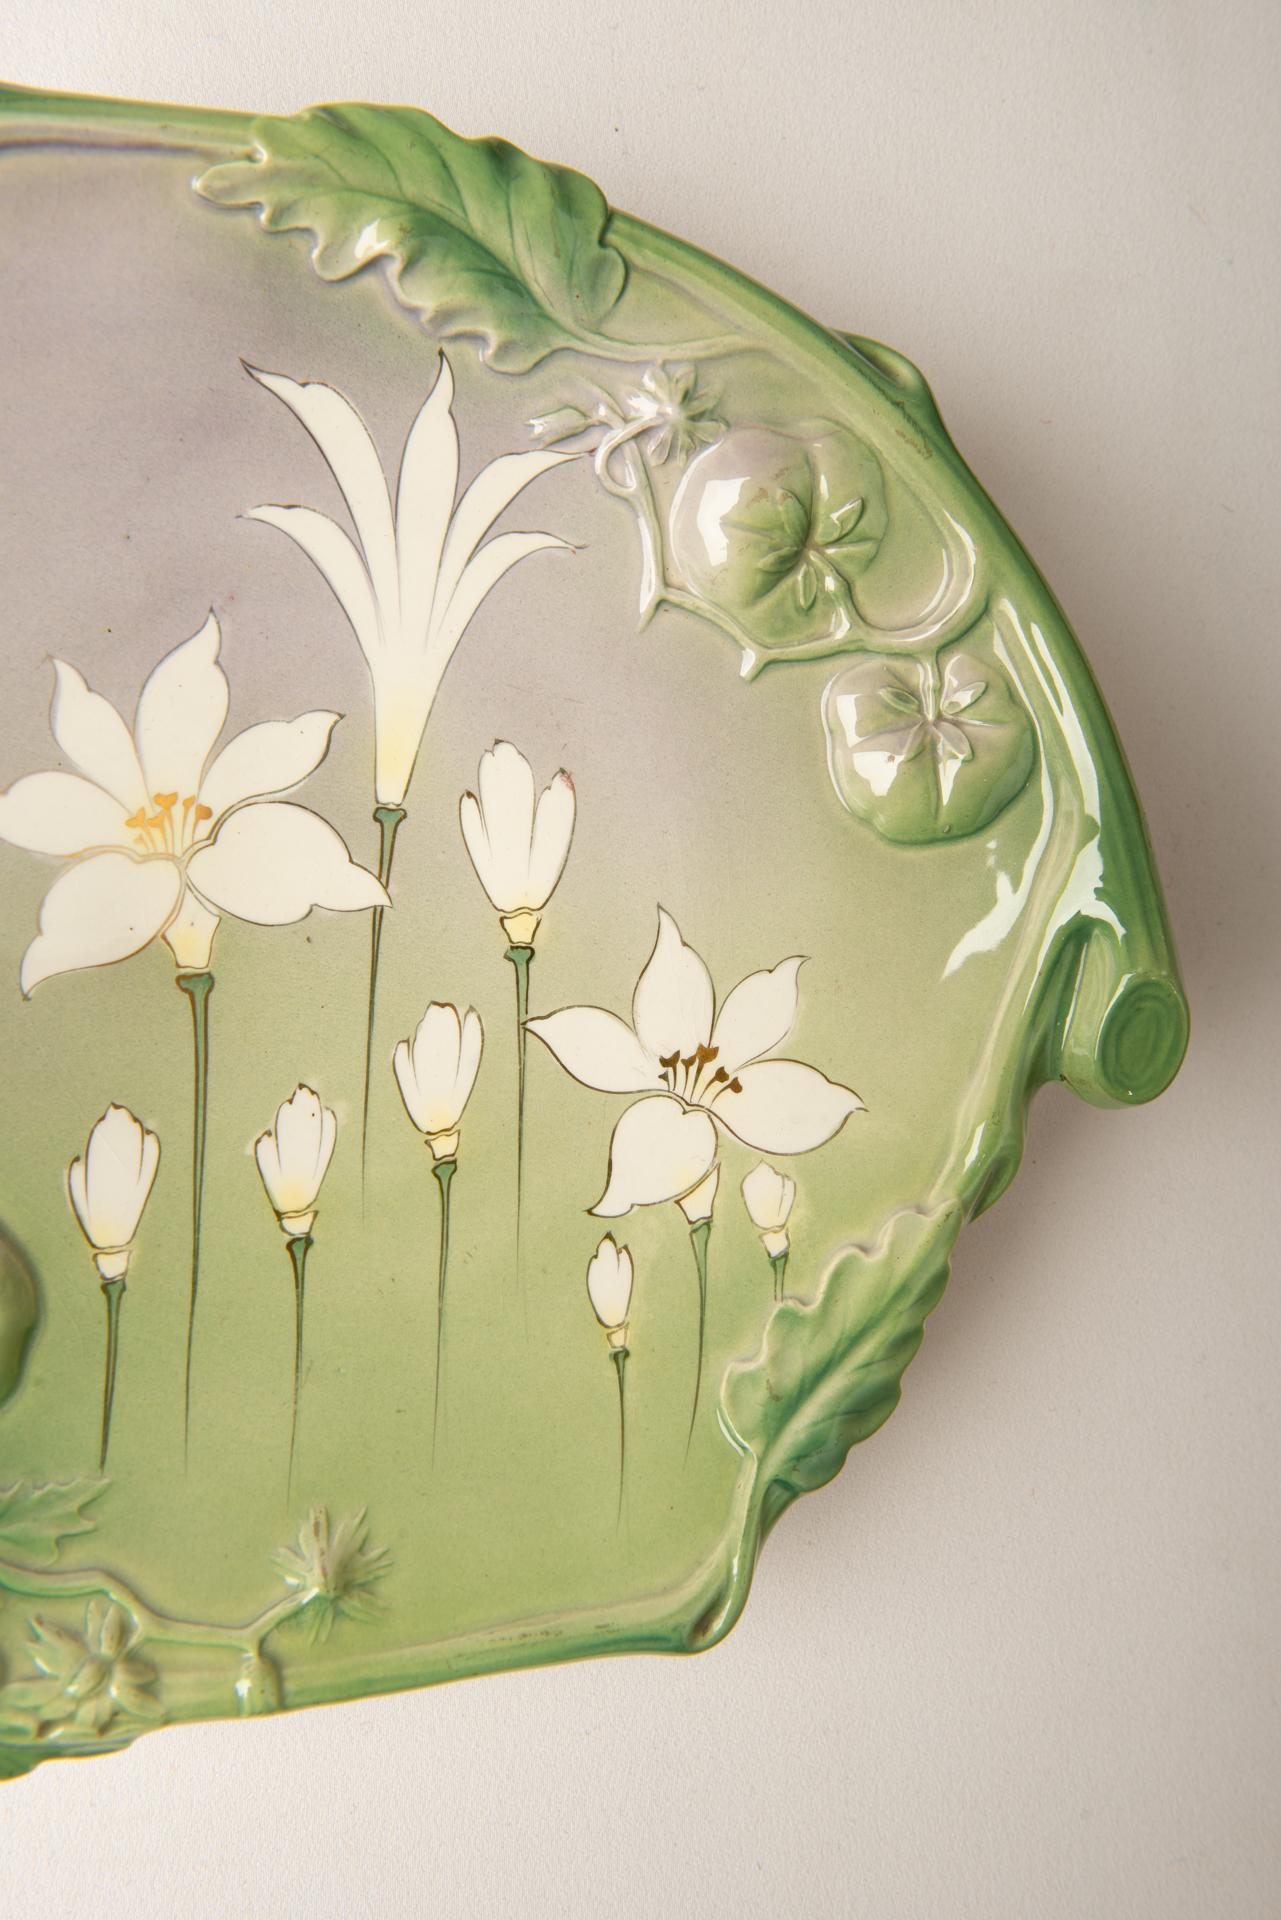 Art Nouveau Period Ceramic Plate with Leaves in Relief In Excellent Condition For Sale In Alessandria, Piemonte